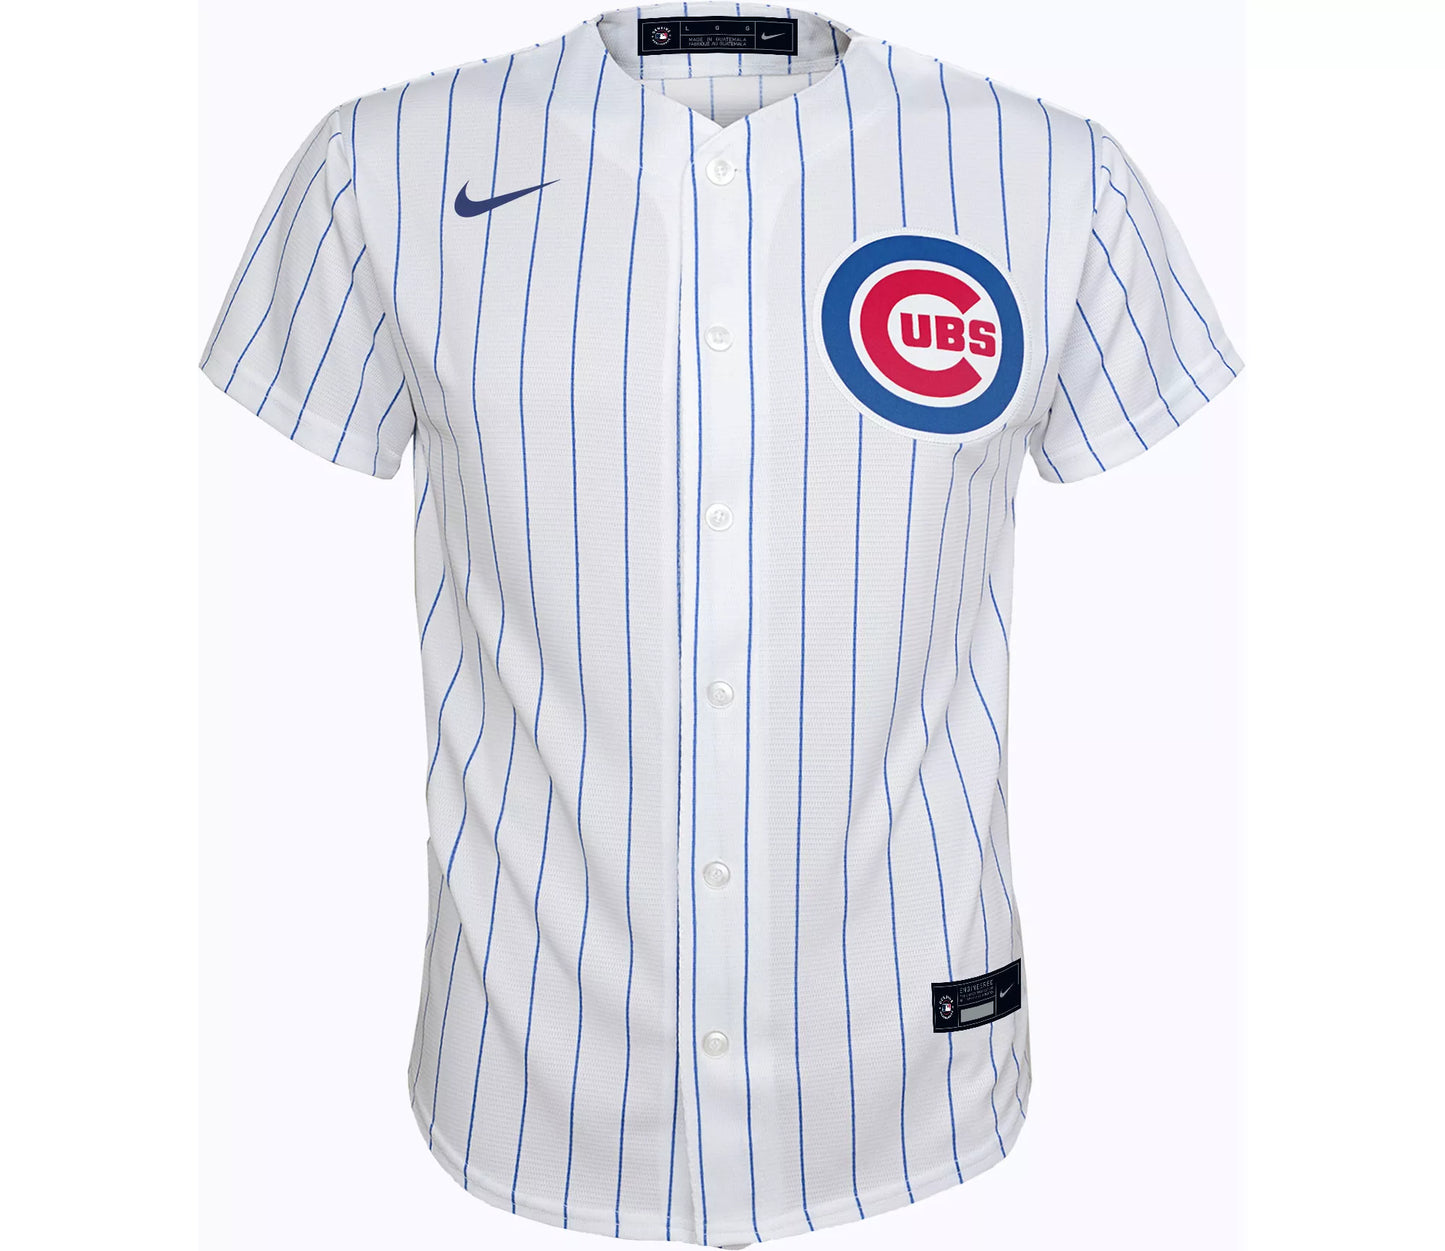 Youth Nike Nico Hoerner Chicago Cubs White Home Premium Replica Jersey